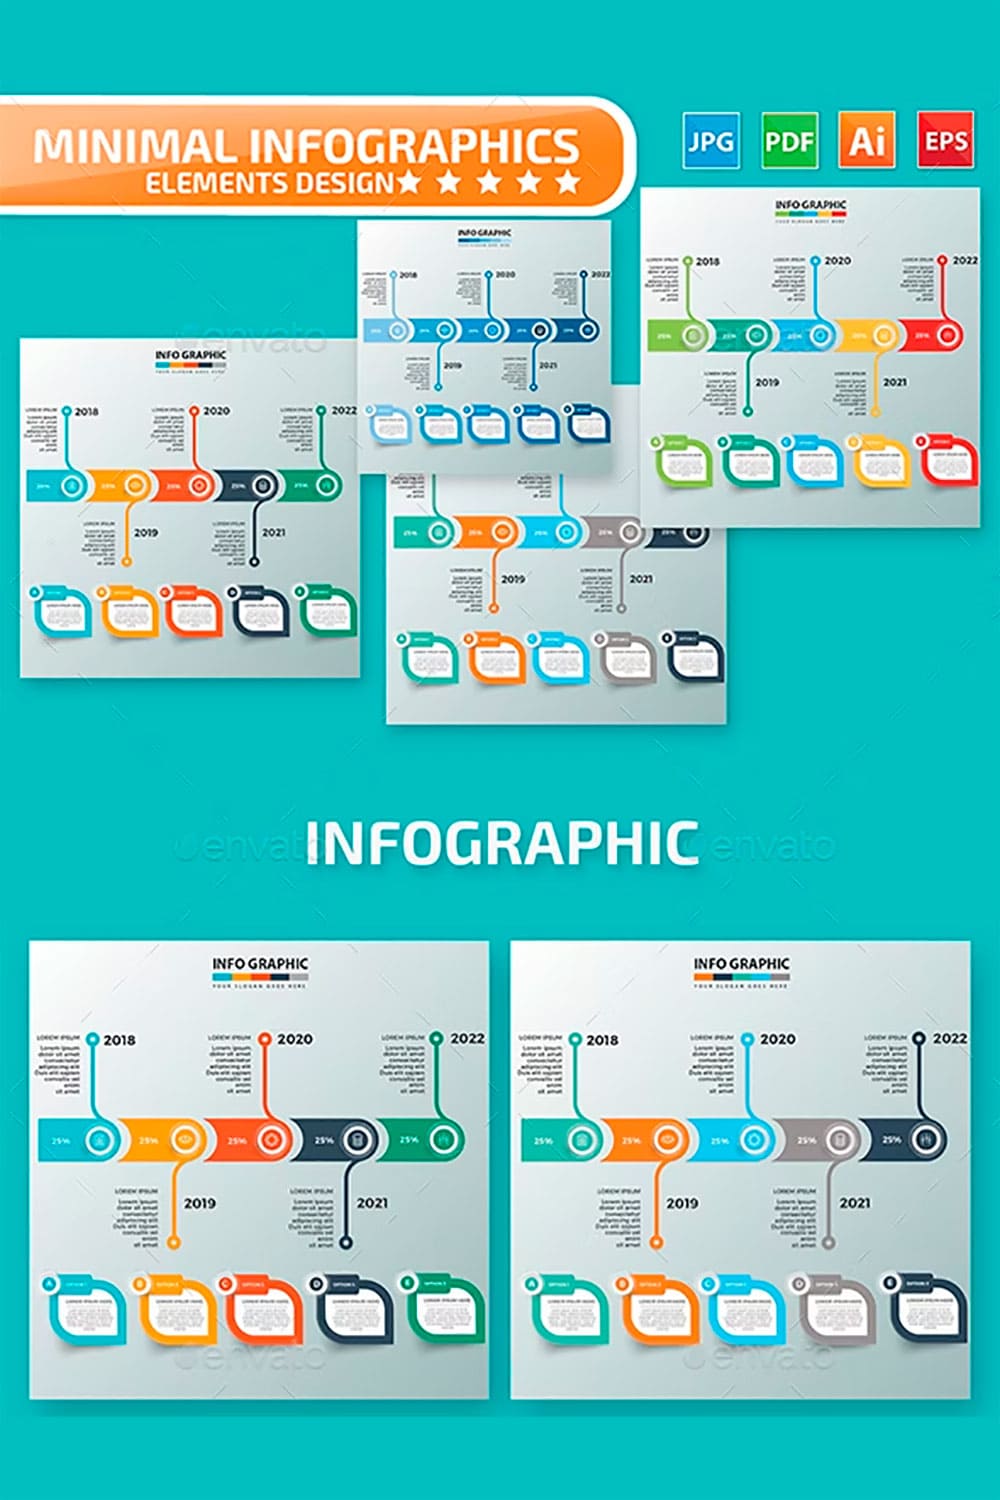 Infographic design, picture for pinterest.